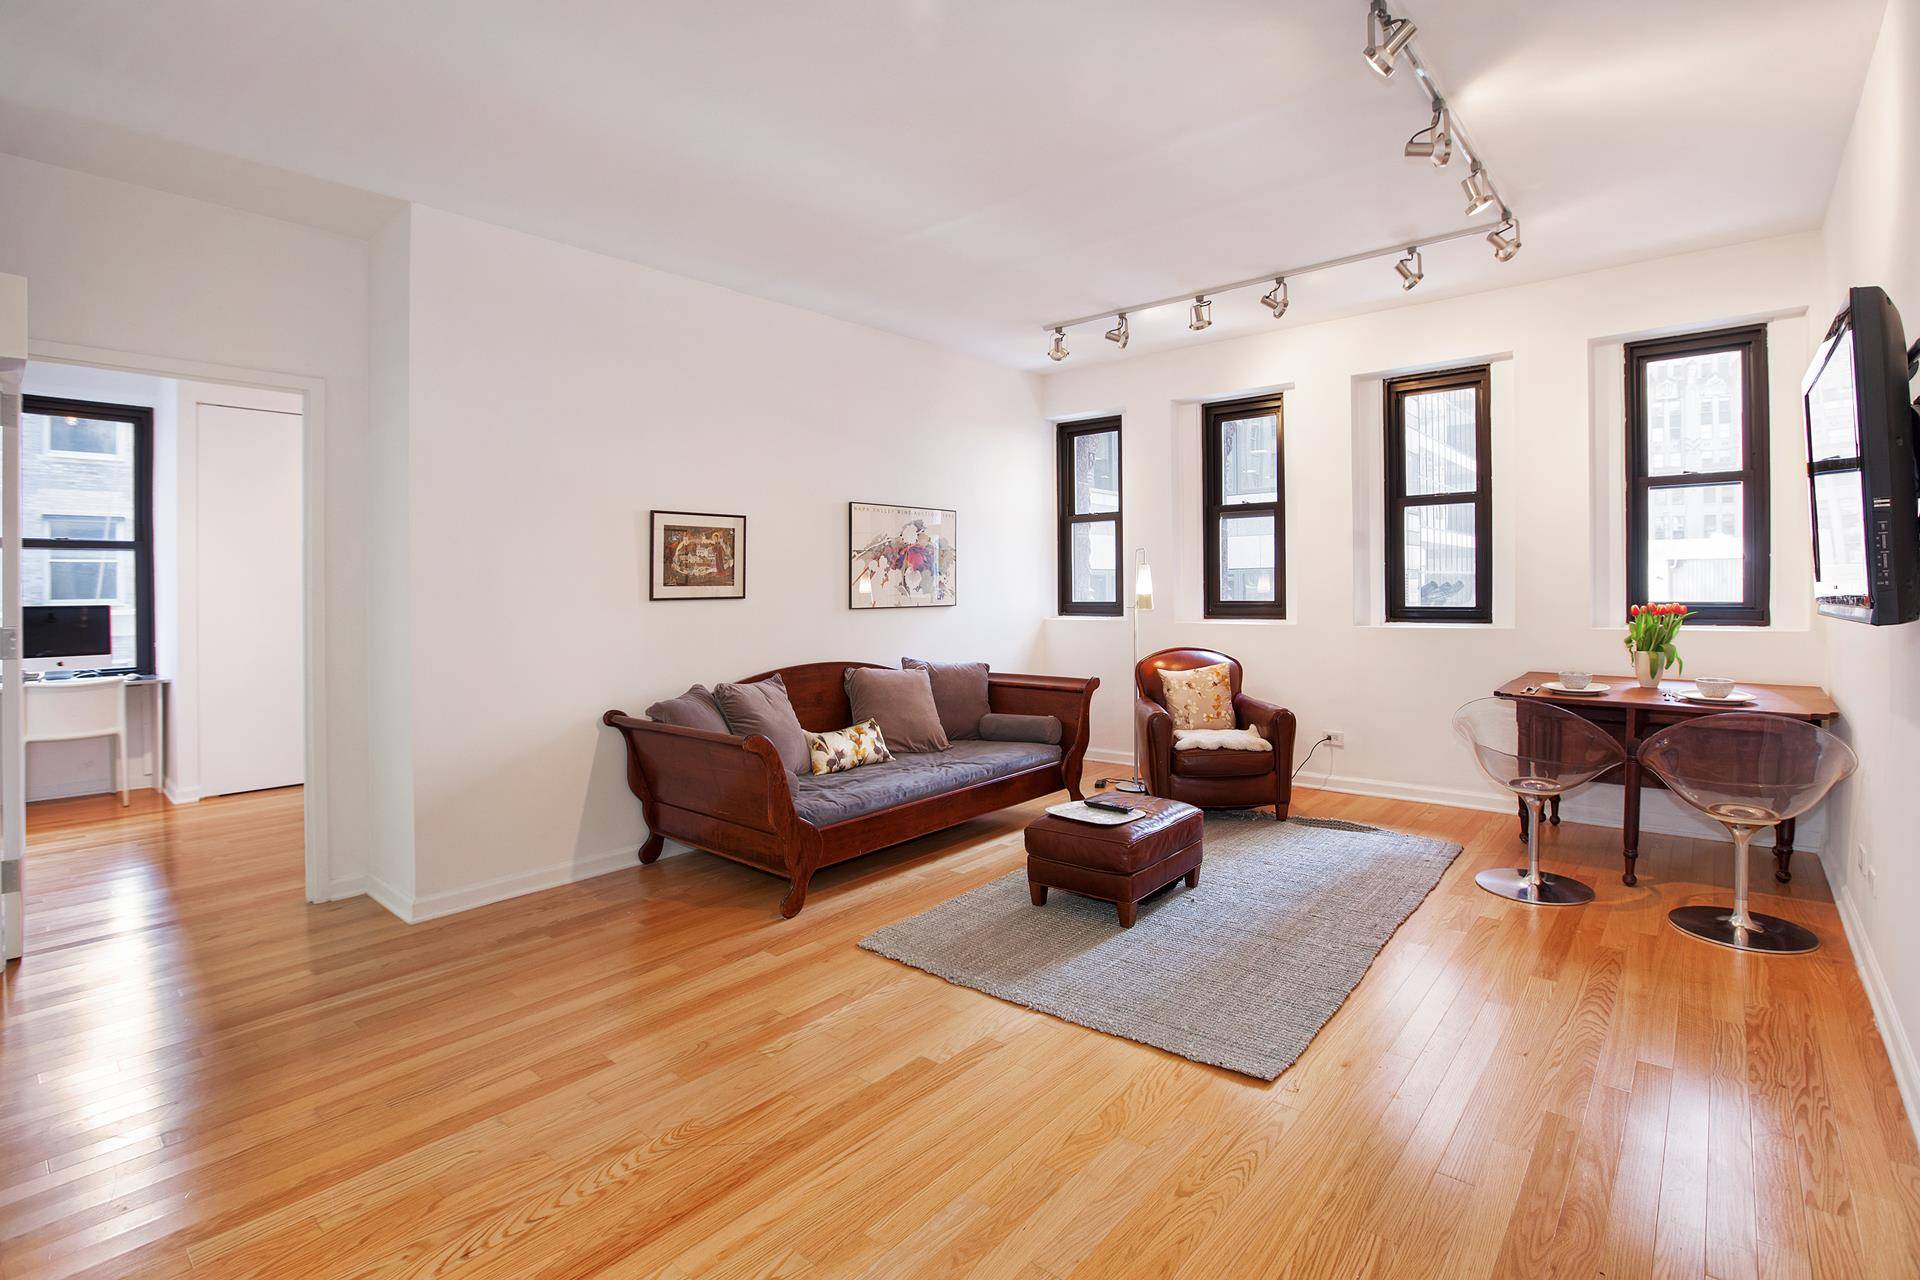 Recently updated loft like one bedroom condominium with both South and East exposures in landmarked 56 Pine Street.